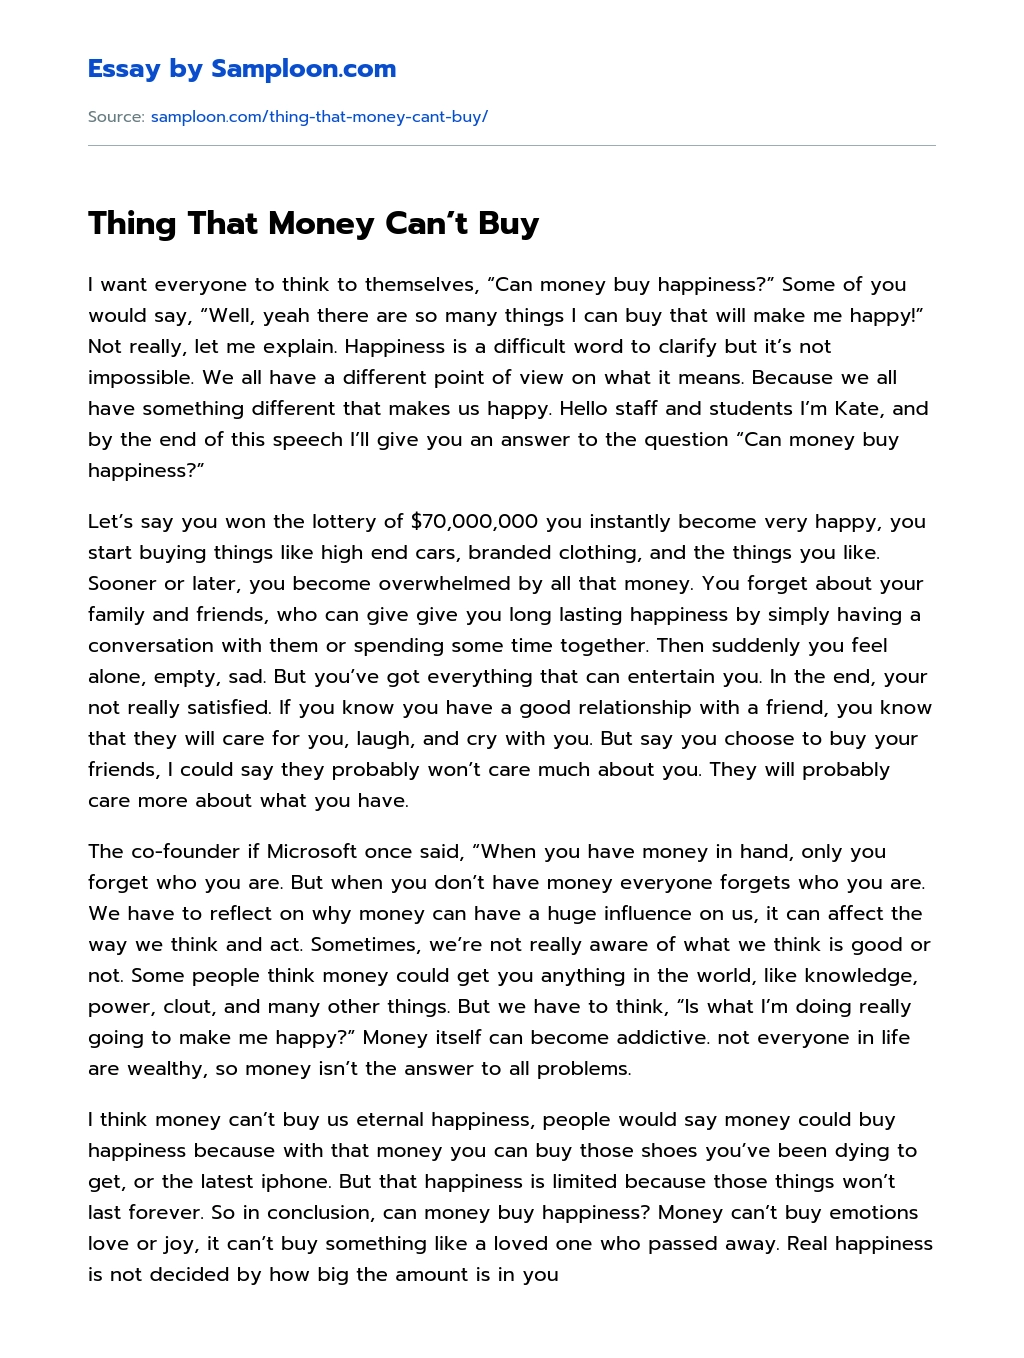 Thing That Money Can’t Buy essay